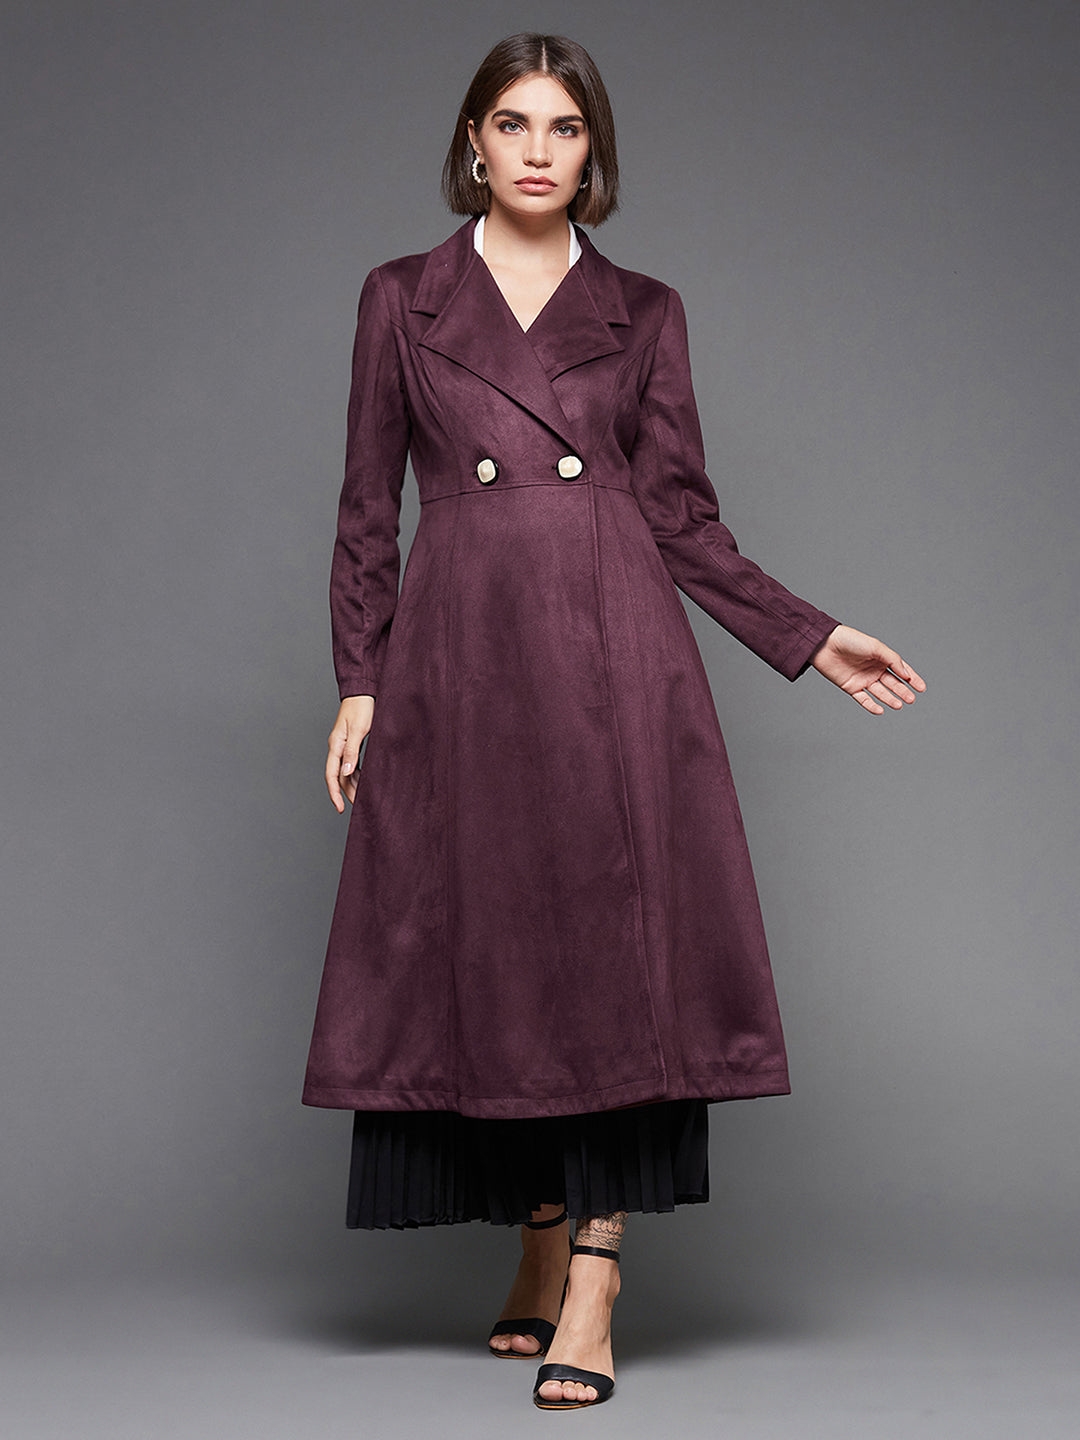 MISS CHASE | Wine Solid V-Neck Full Sleeves Side Pocketed Polyester Double Breasted Longline Jacket